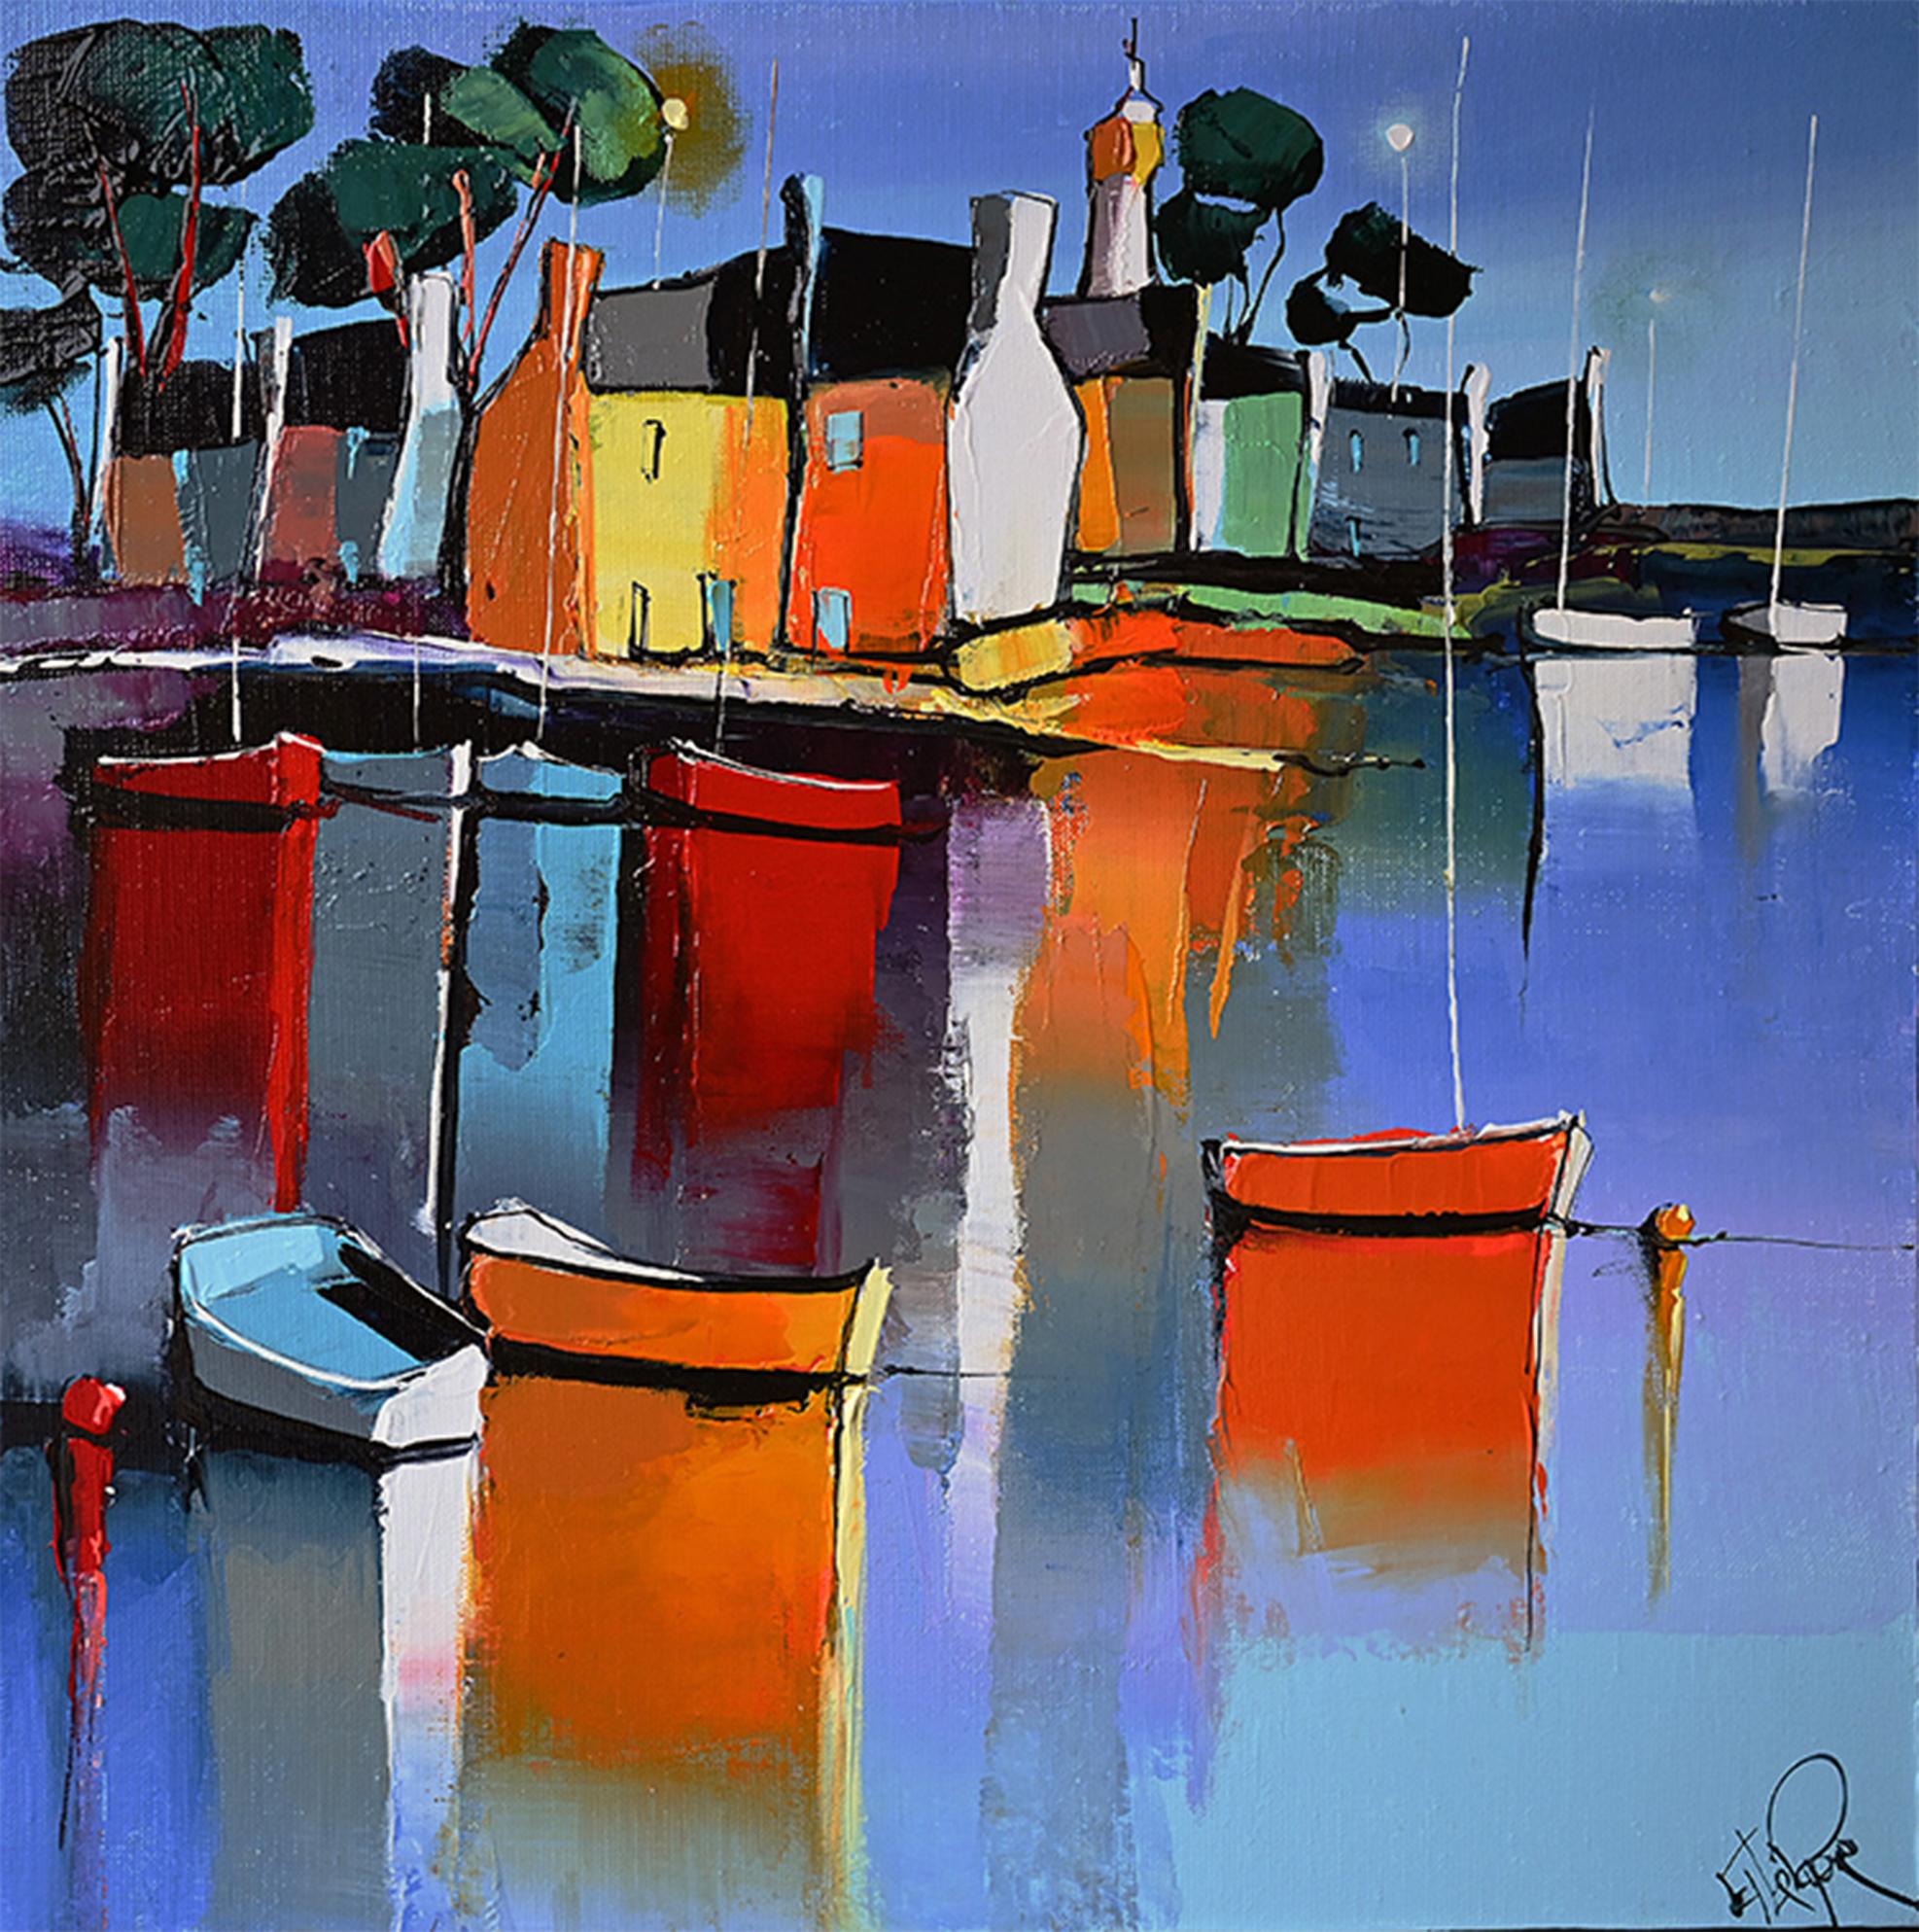 A L'ombre Du Phare - Ships In The Ocean - Landscape Painting by Eric Le Pape